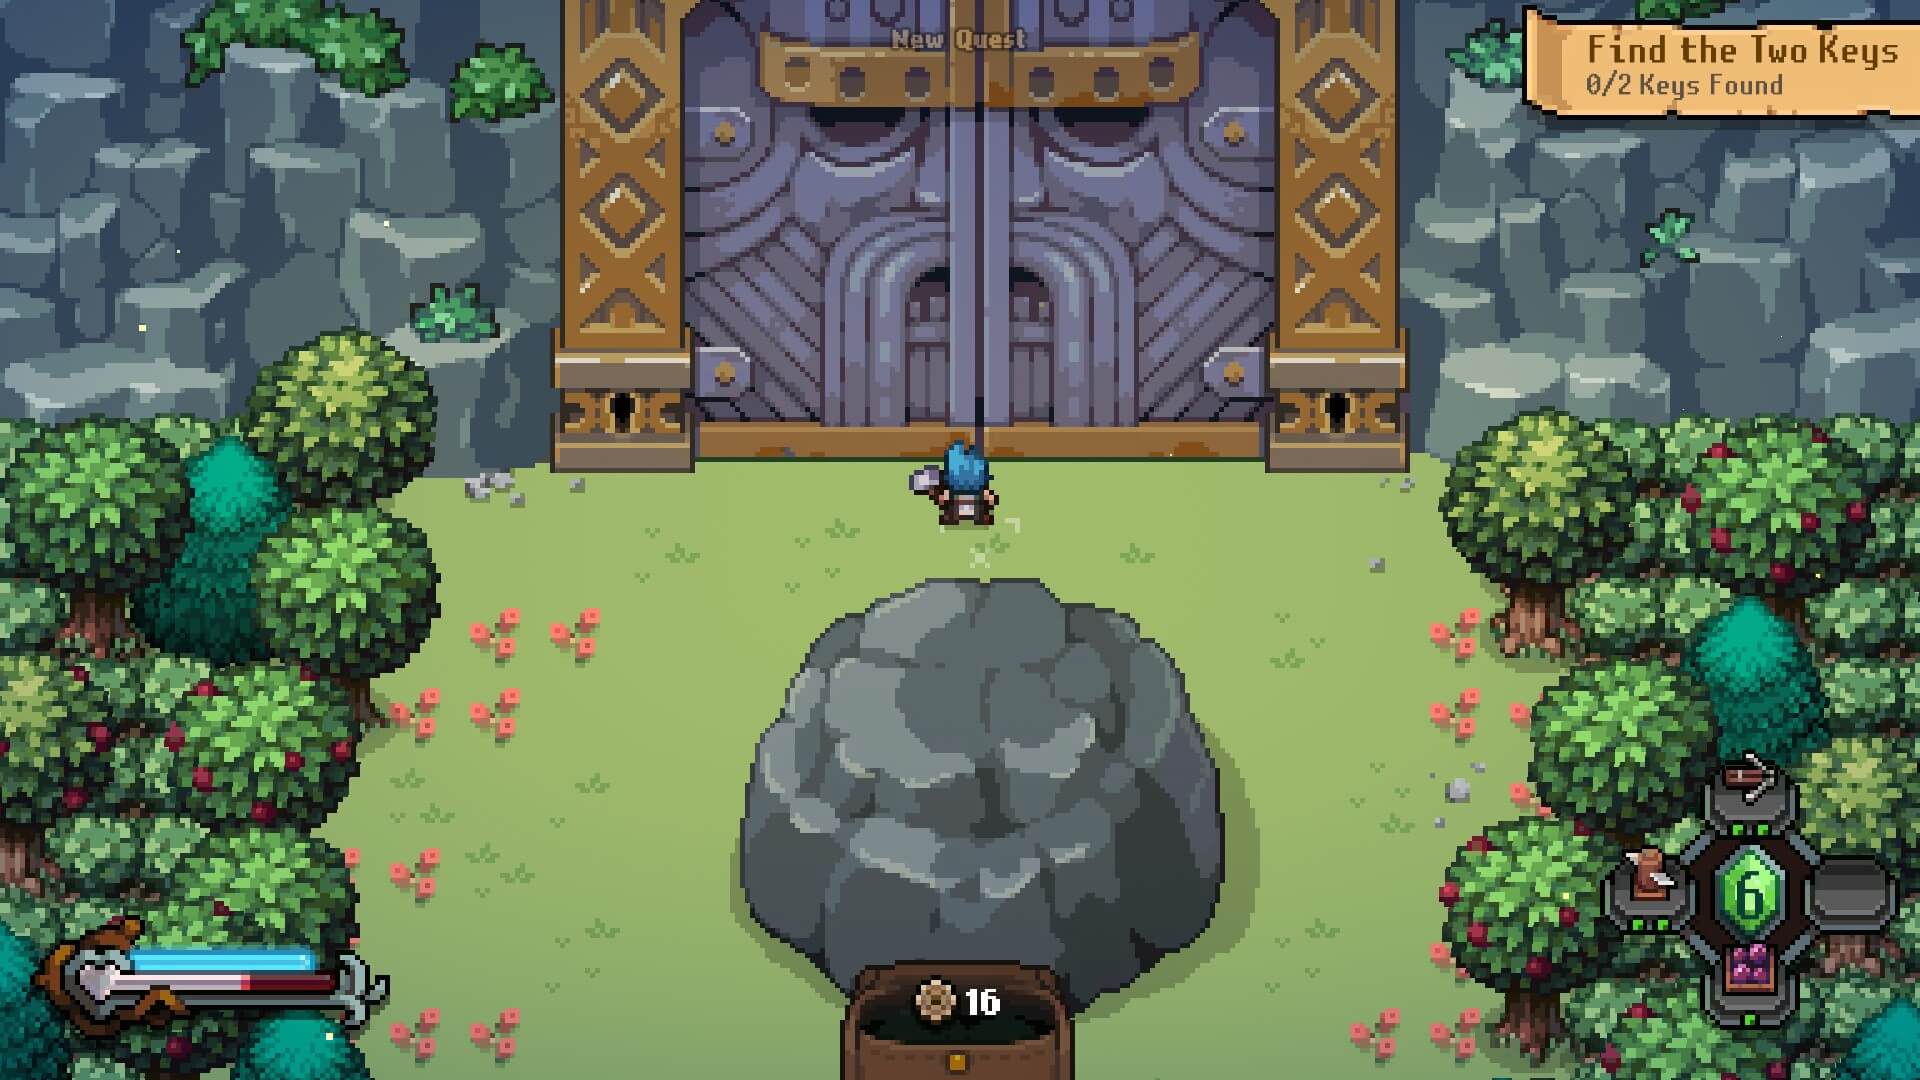 The hero is stood outside a beautifully carved door. The top right is the objective asking for Dwerve to find two keys. 